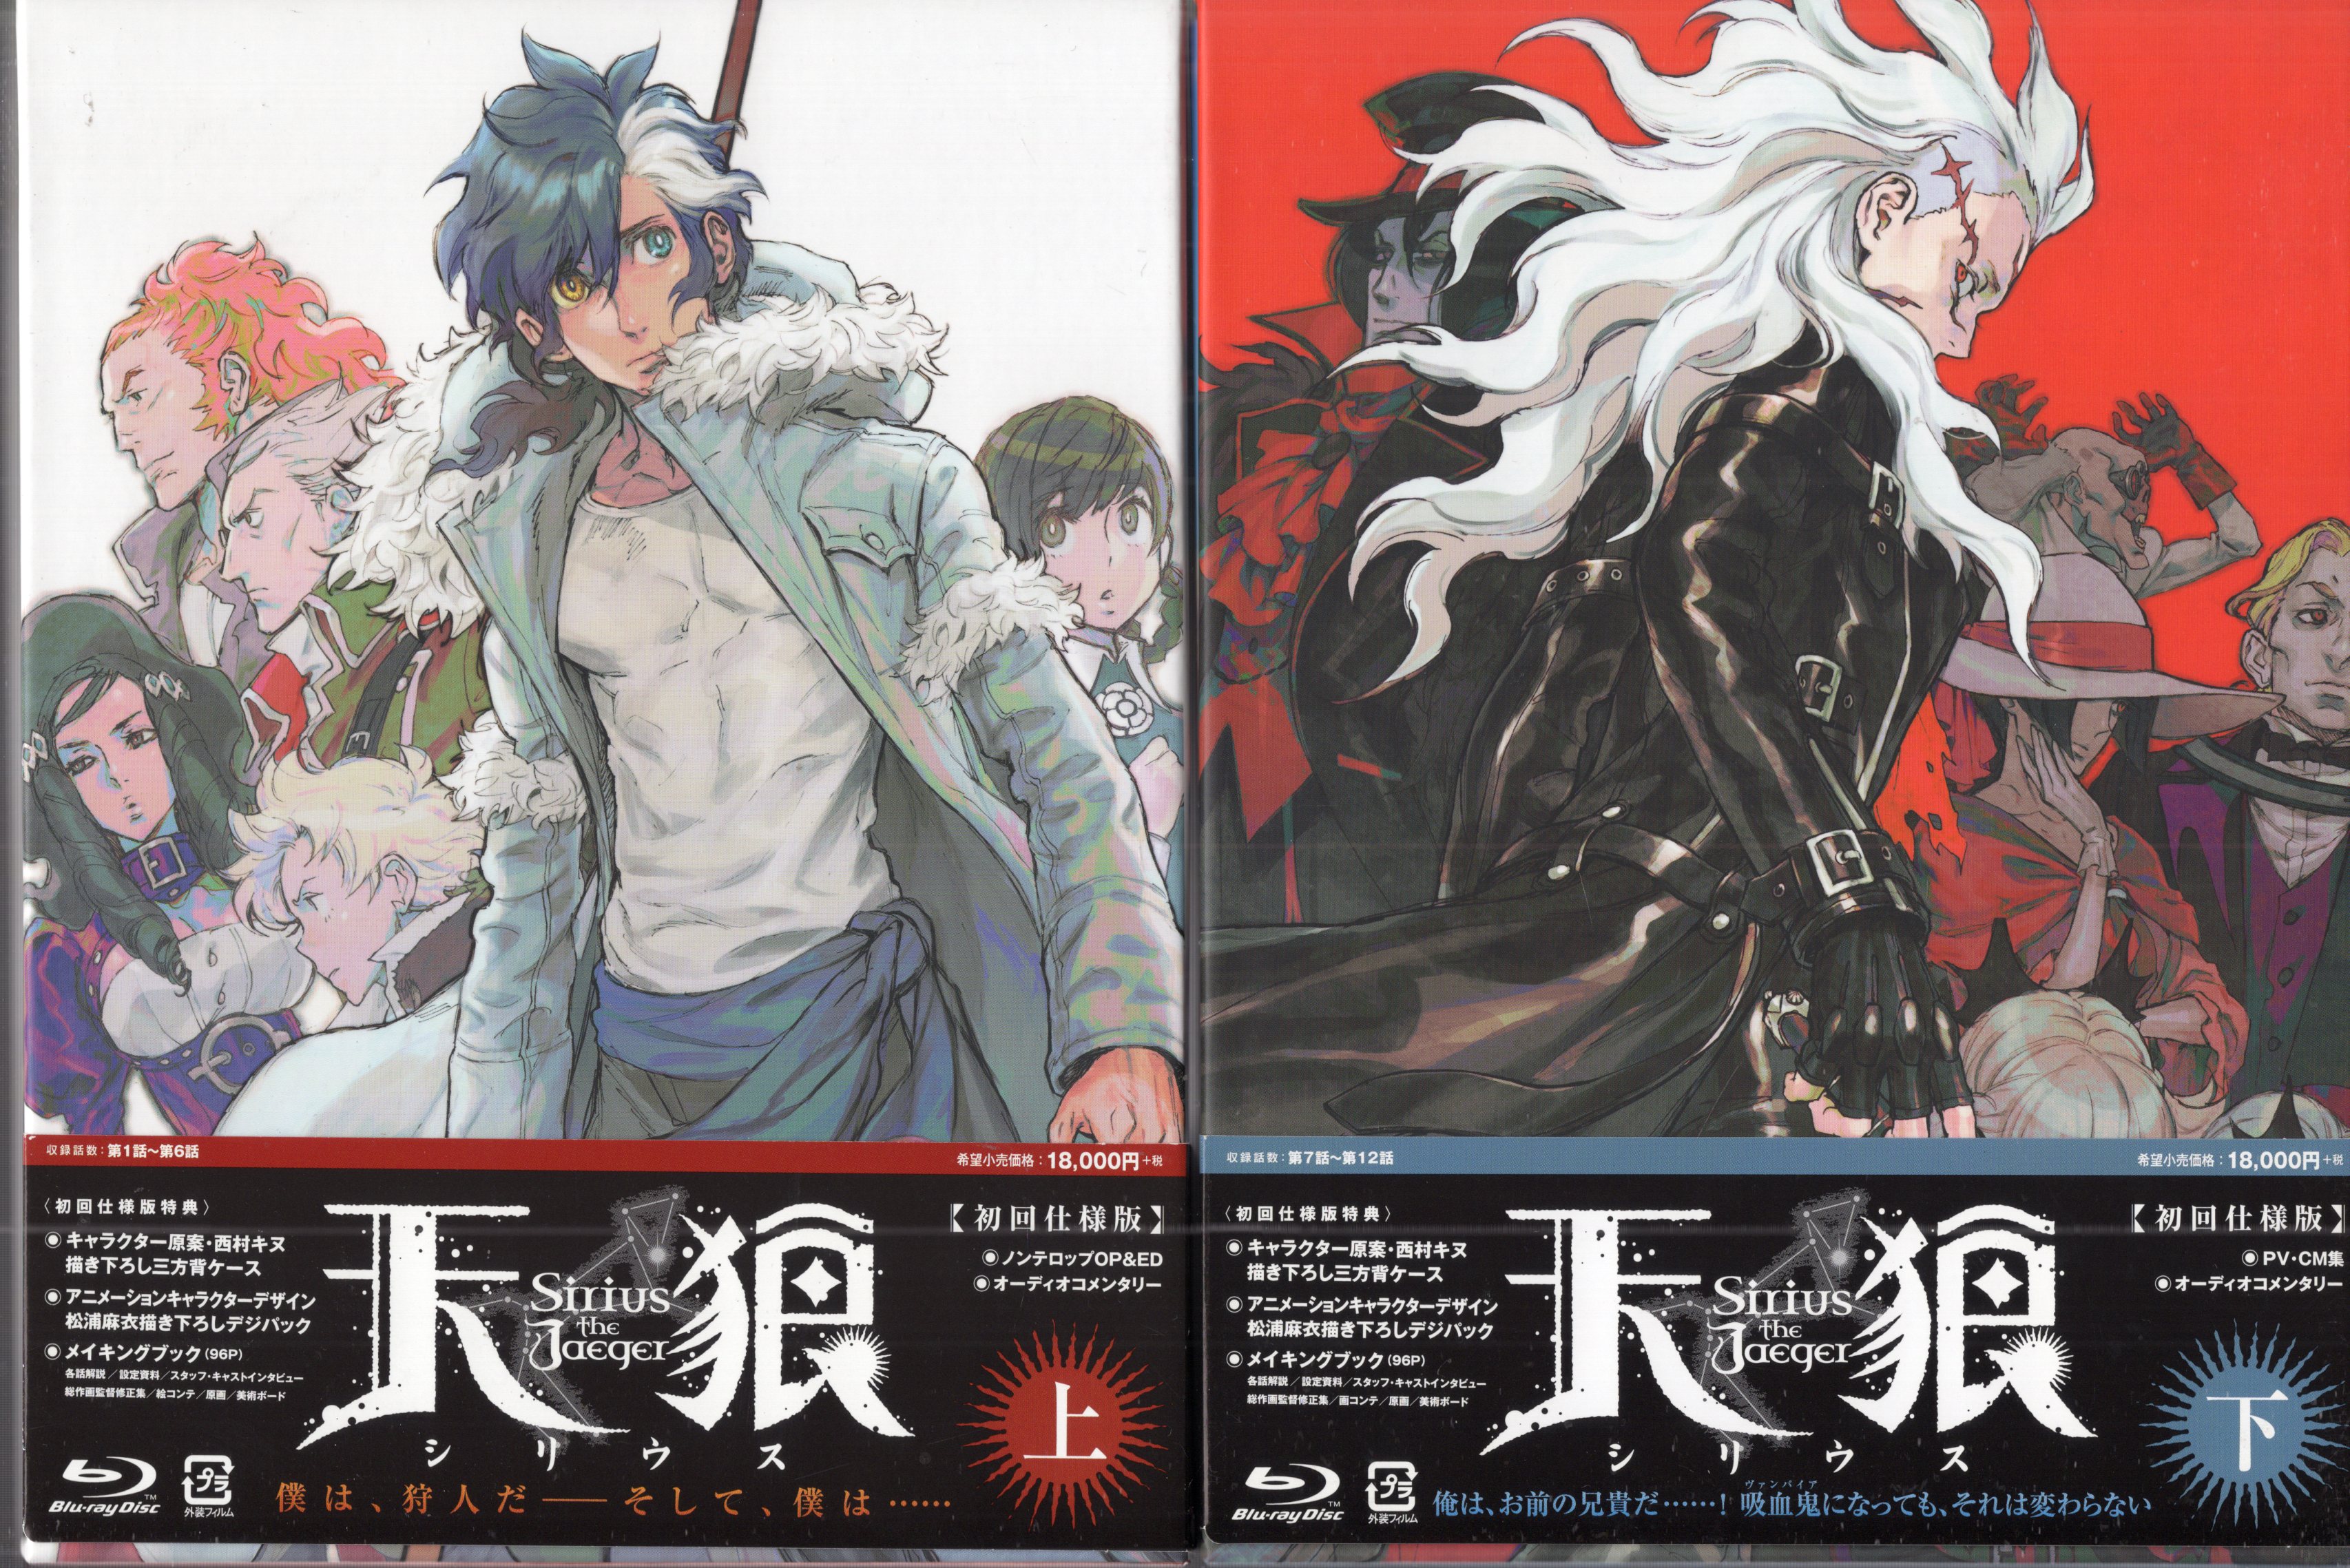 Tenwolf Sirius the Jaeger Vol. 7 - 12 Episodes / 1 Disc Set / First Press  Edition (Blu-ray)